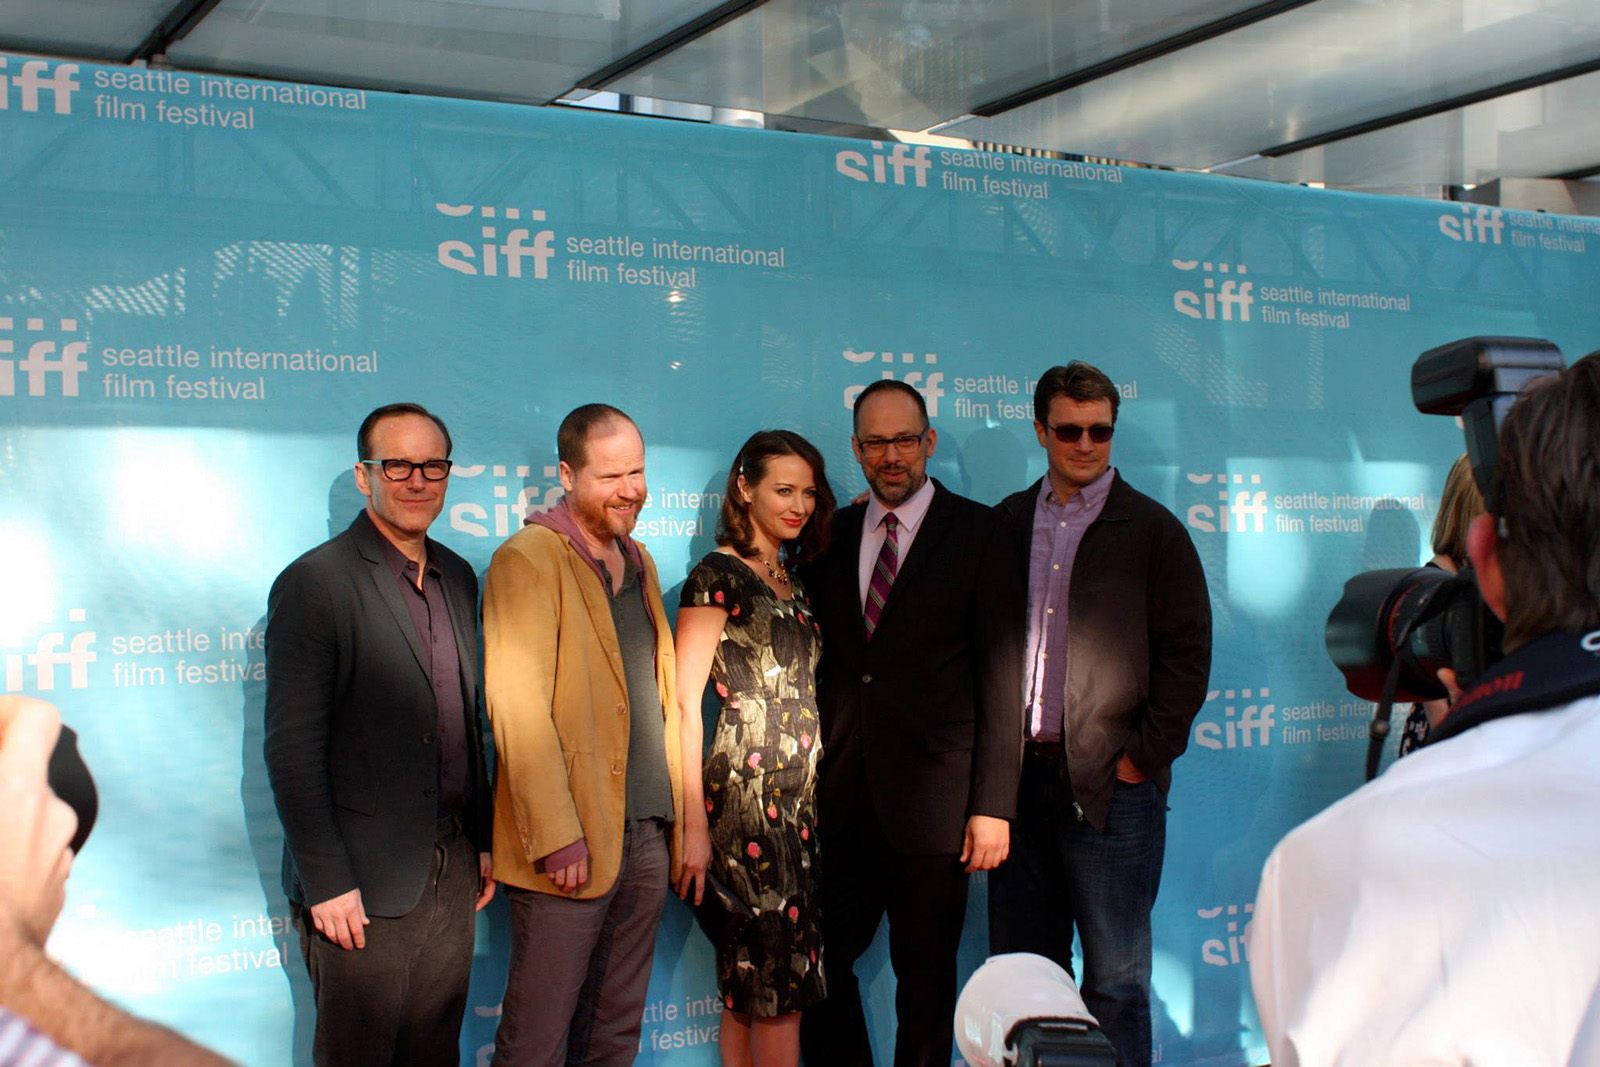 Opening Night at McCaw Hall, featuring actor, Clark Gregg, director, Joss Whedon, actor, Amy Acker, SIFF Artistic Director, Carl Spence, and actor, Nathan Fillion from the red carpet, before a screening of their film, Much Ado About Nothing